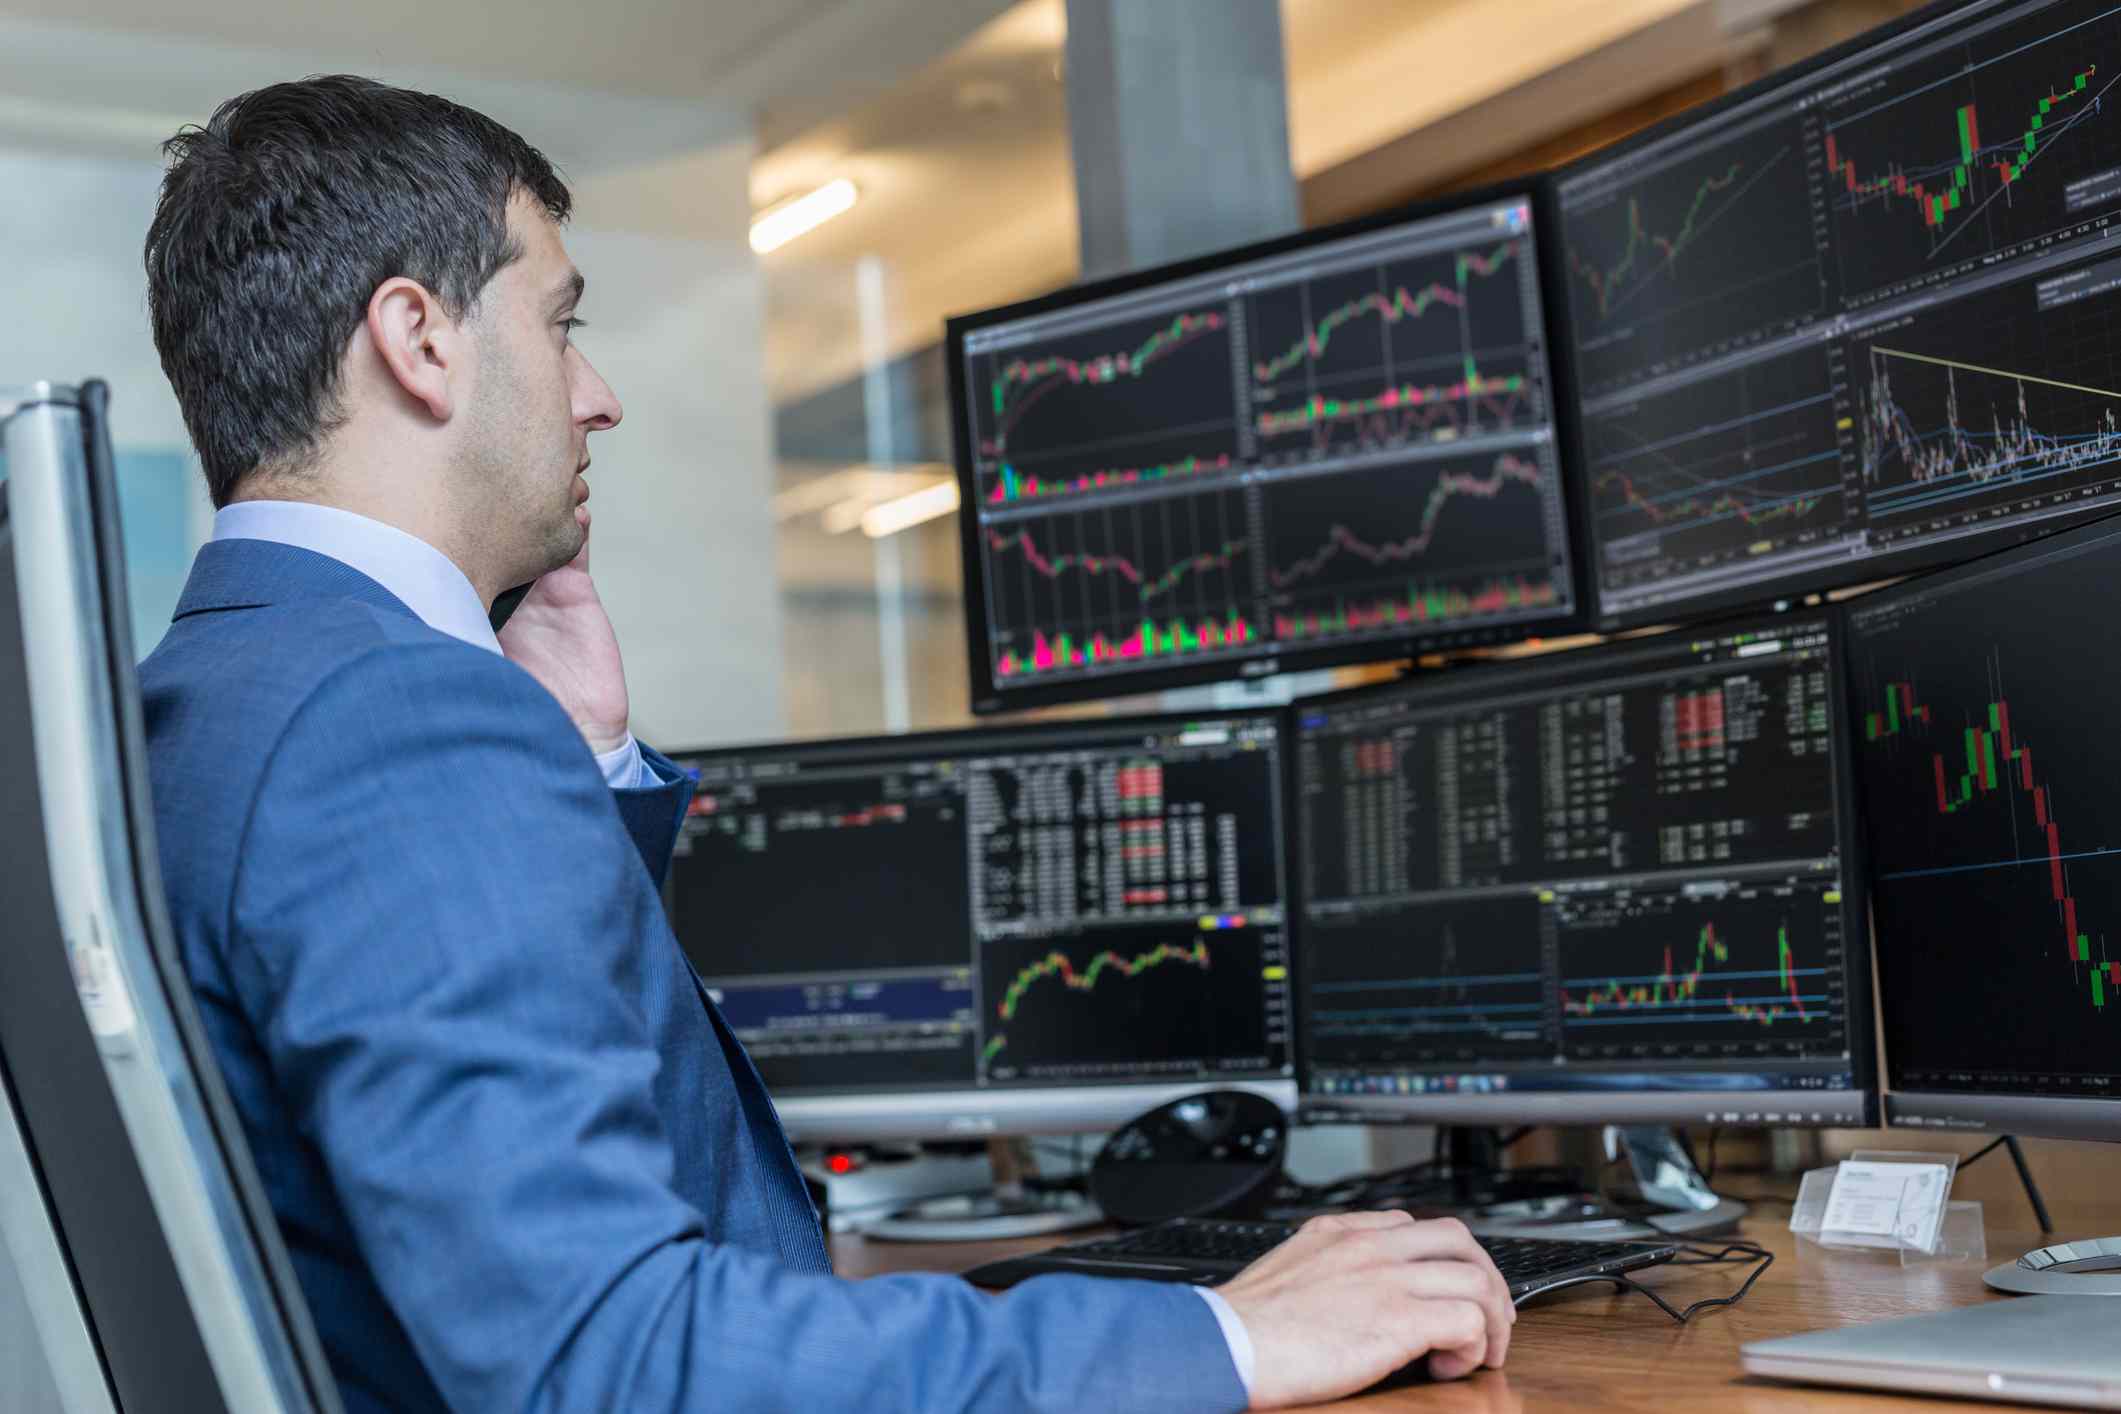 Stock broker trading online watching charts and data analyses on multiple computer screens.